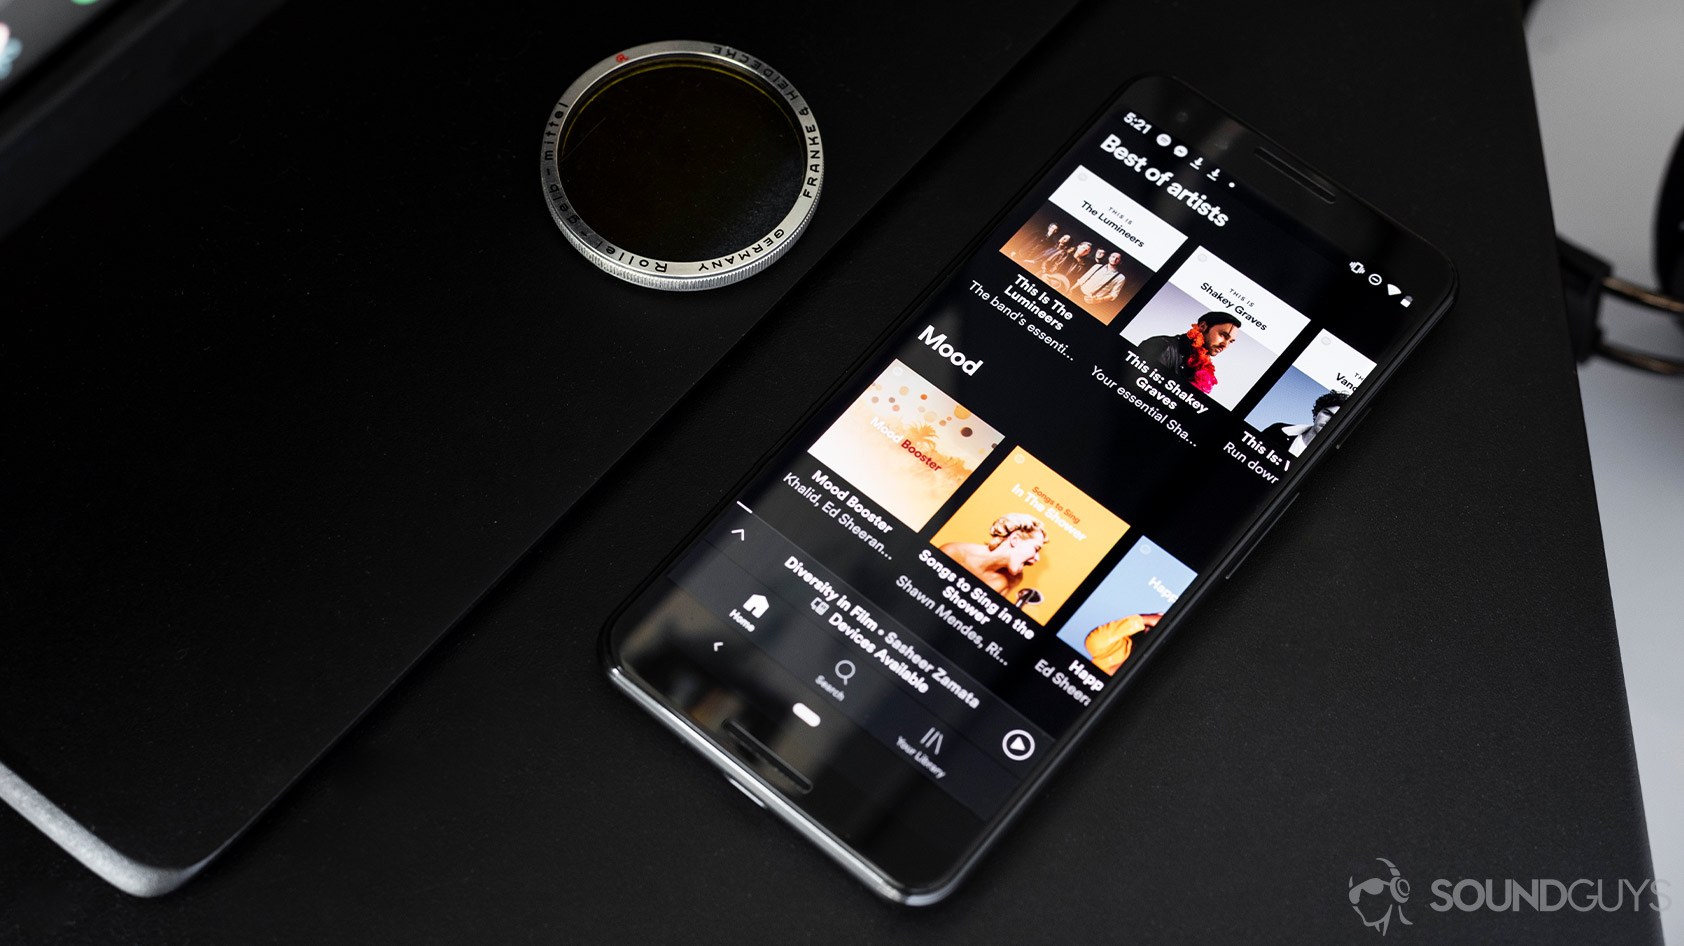 Apple Music: Features, Devices, Pricing, Lossless, and more